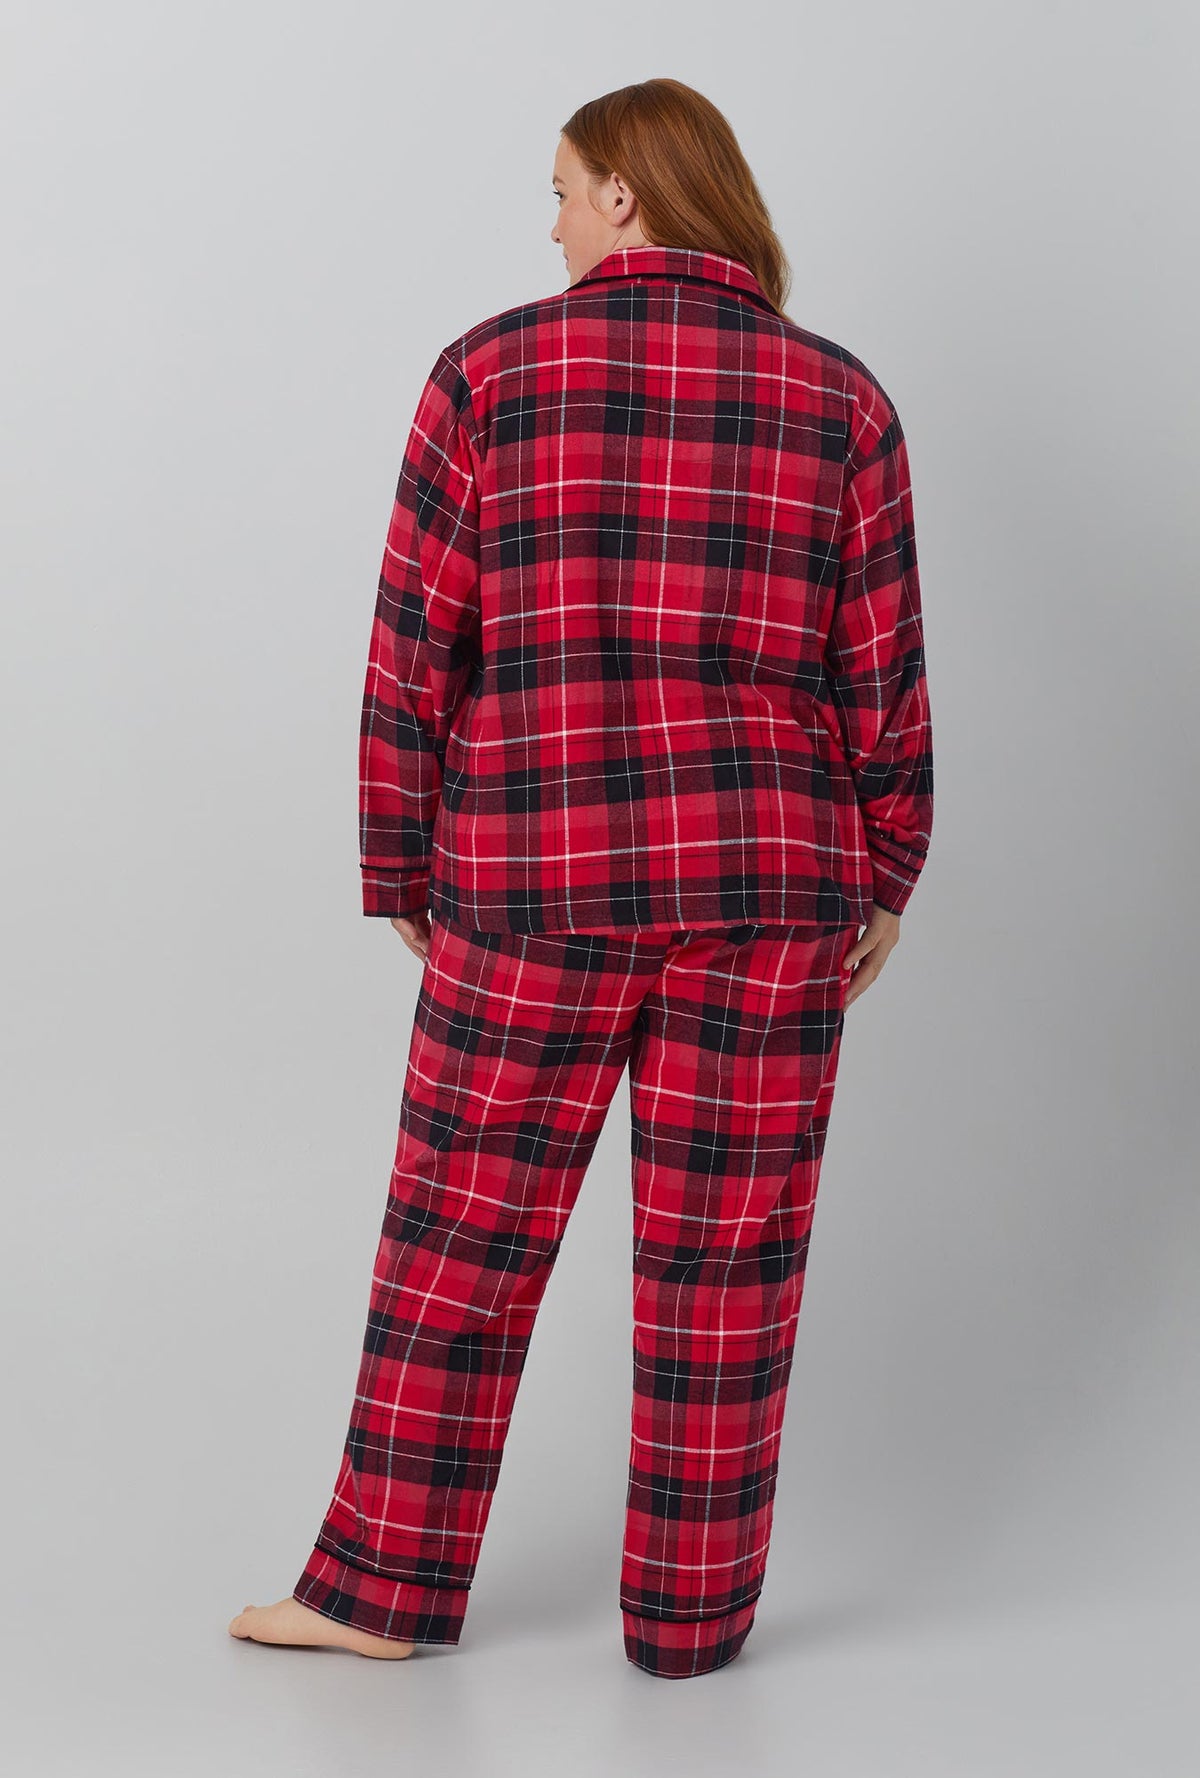 A lady wearing red long sleeve clasic woven cotton flannel plus pj set with nicholas plaid print.